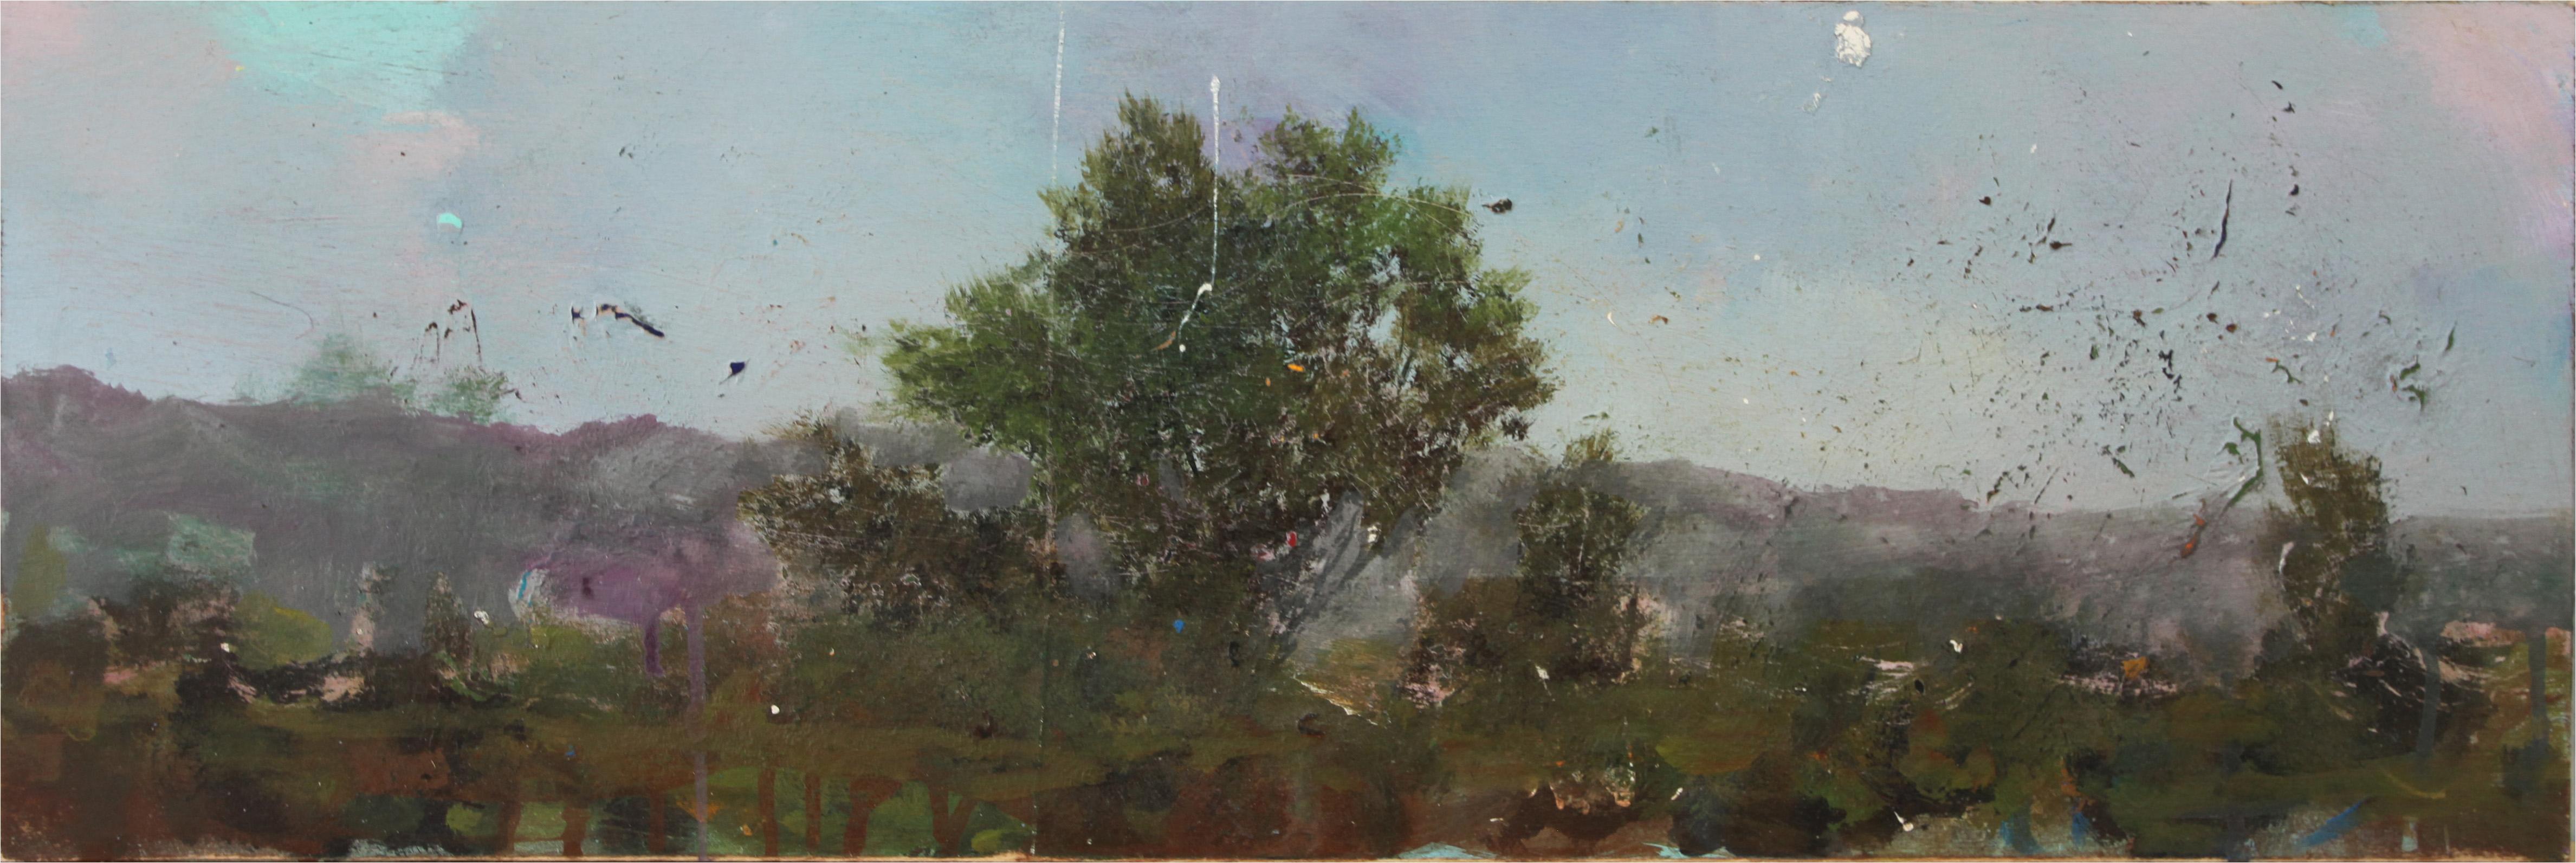 Peter Hoffer
Edge, 2016
oil, acrylic and resin on panel
10 x 30 in.
(hoff168)

This original landscape painting on panel by Peter Hoffer is simultaneously contemporary and traditional, with a glistening surface of thick resin over dripping,